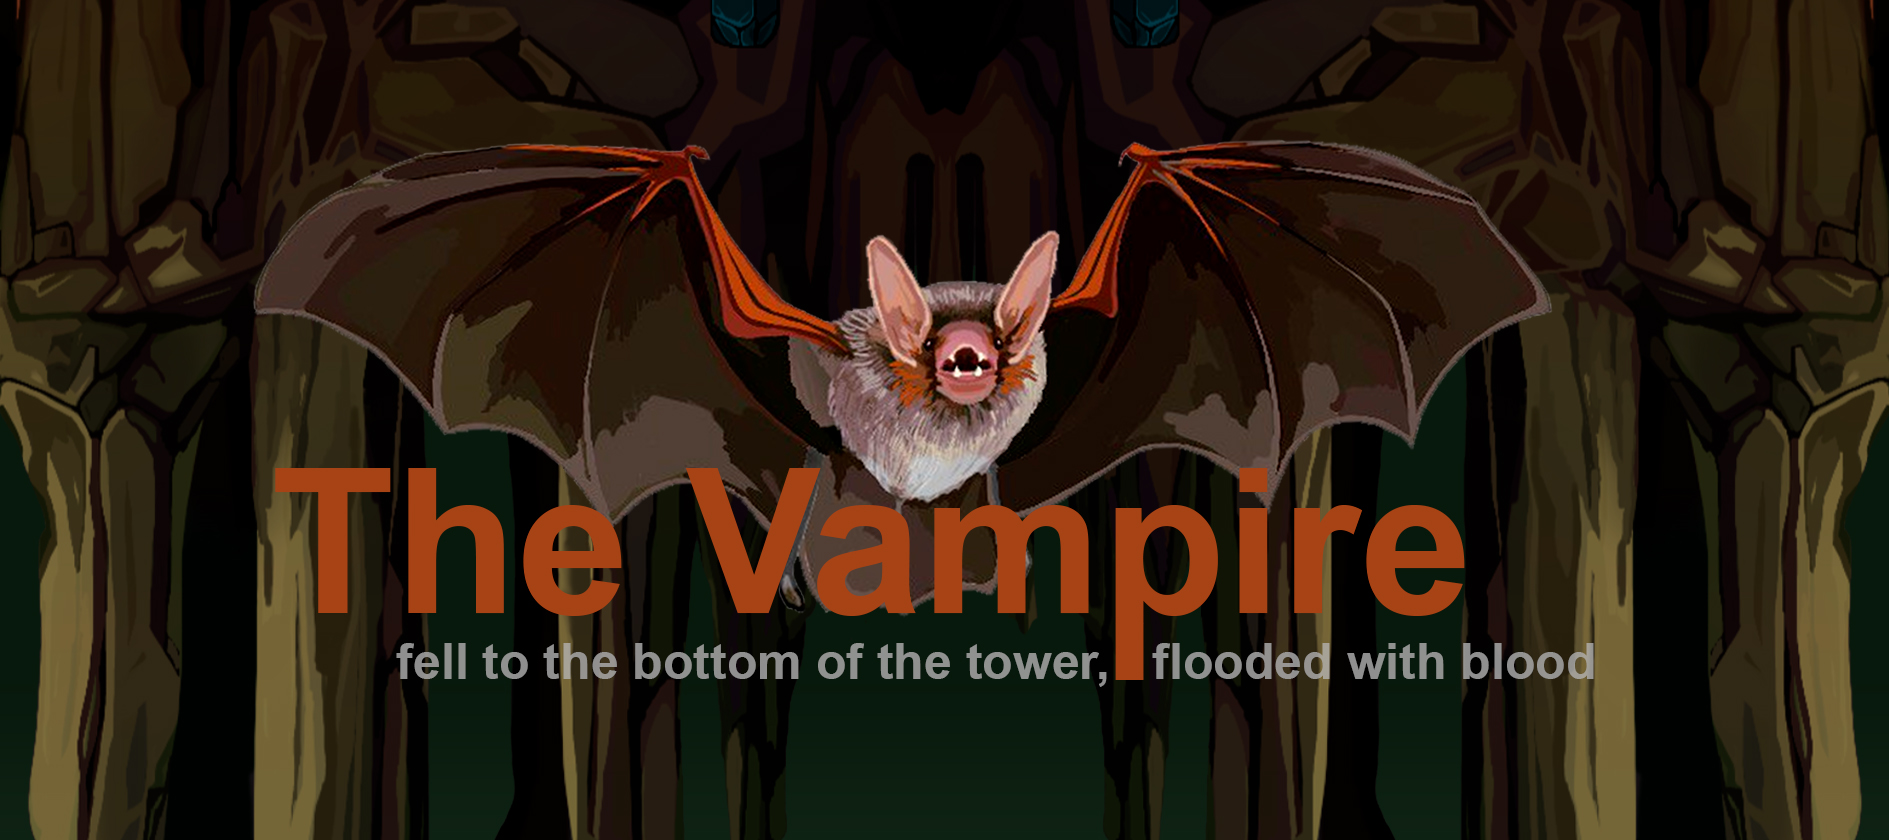 The vampire fell to the bottom of the tower, flooded with blood